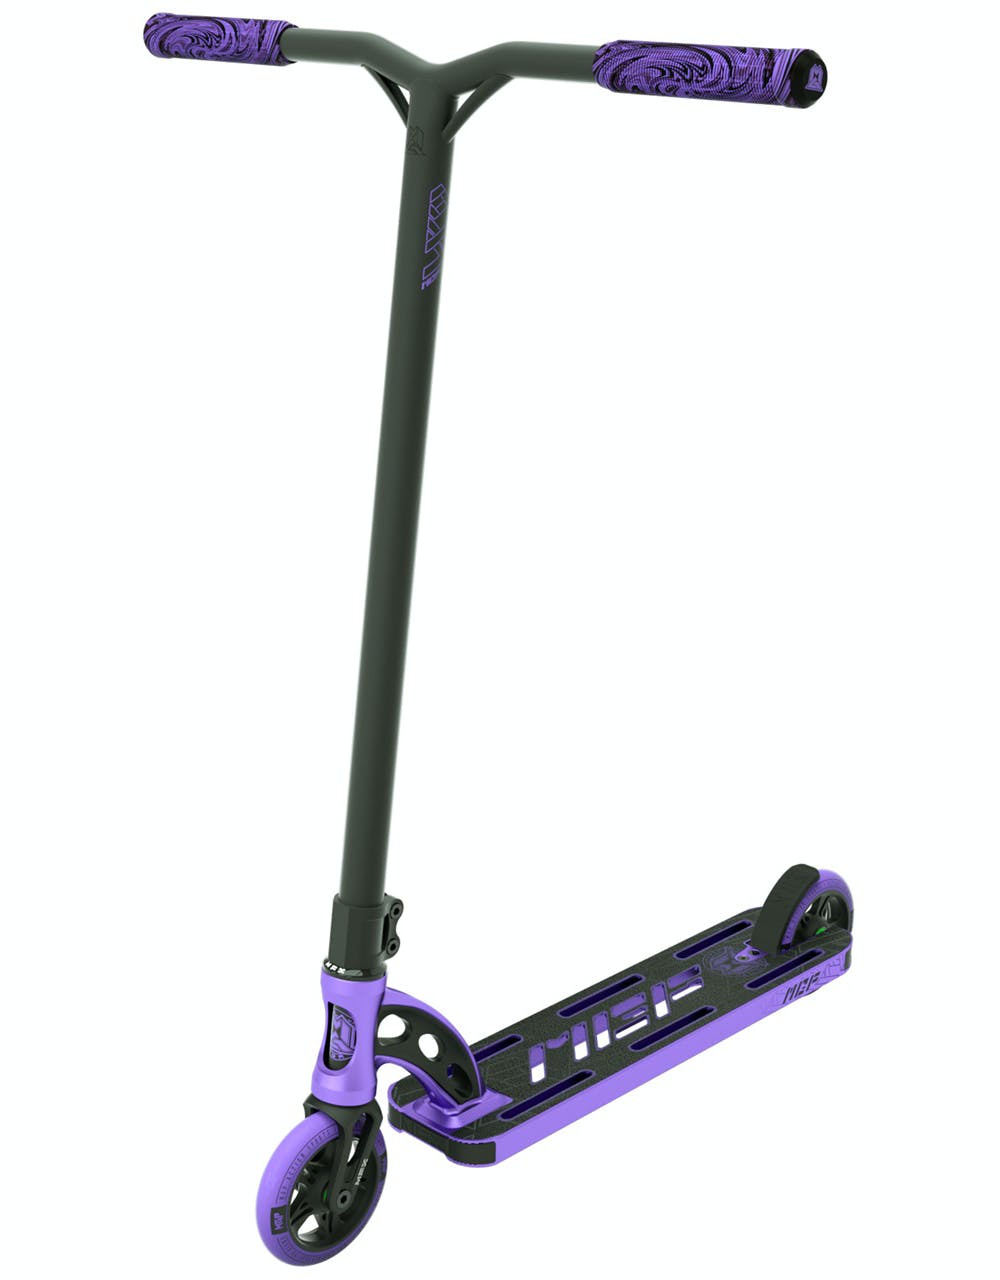 MGP VX 9 Team Edition 4.5" Complete Scooter - Purple